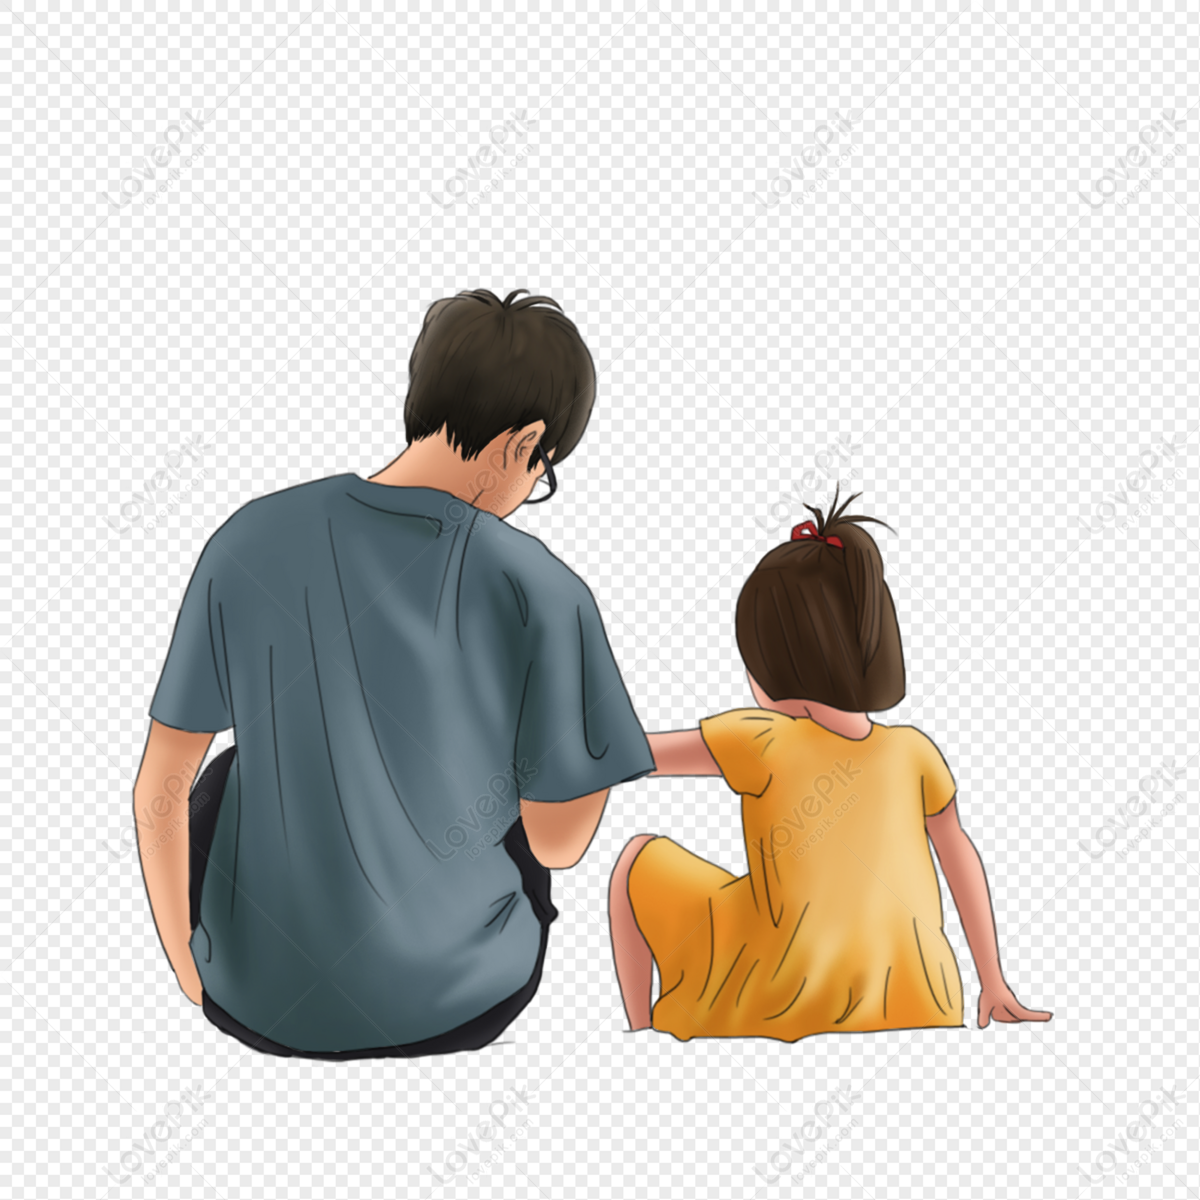 Father With Children PNG Hd Transparent Image And Clipart Image For Free  Download - Lovepik | 401753684